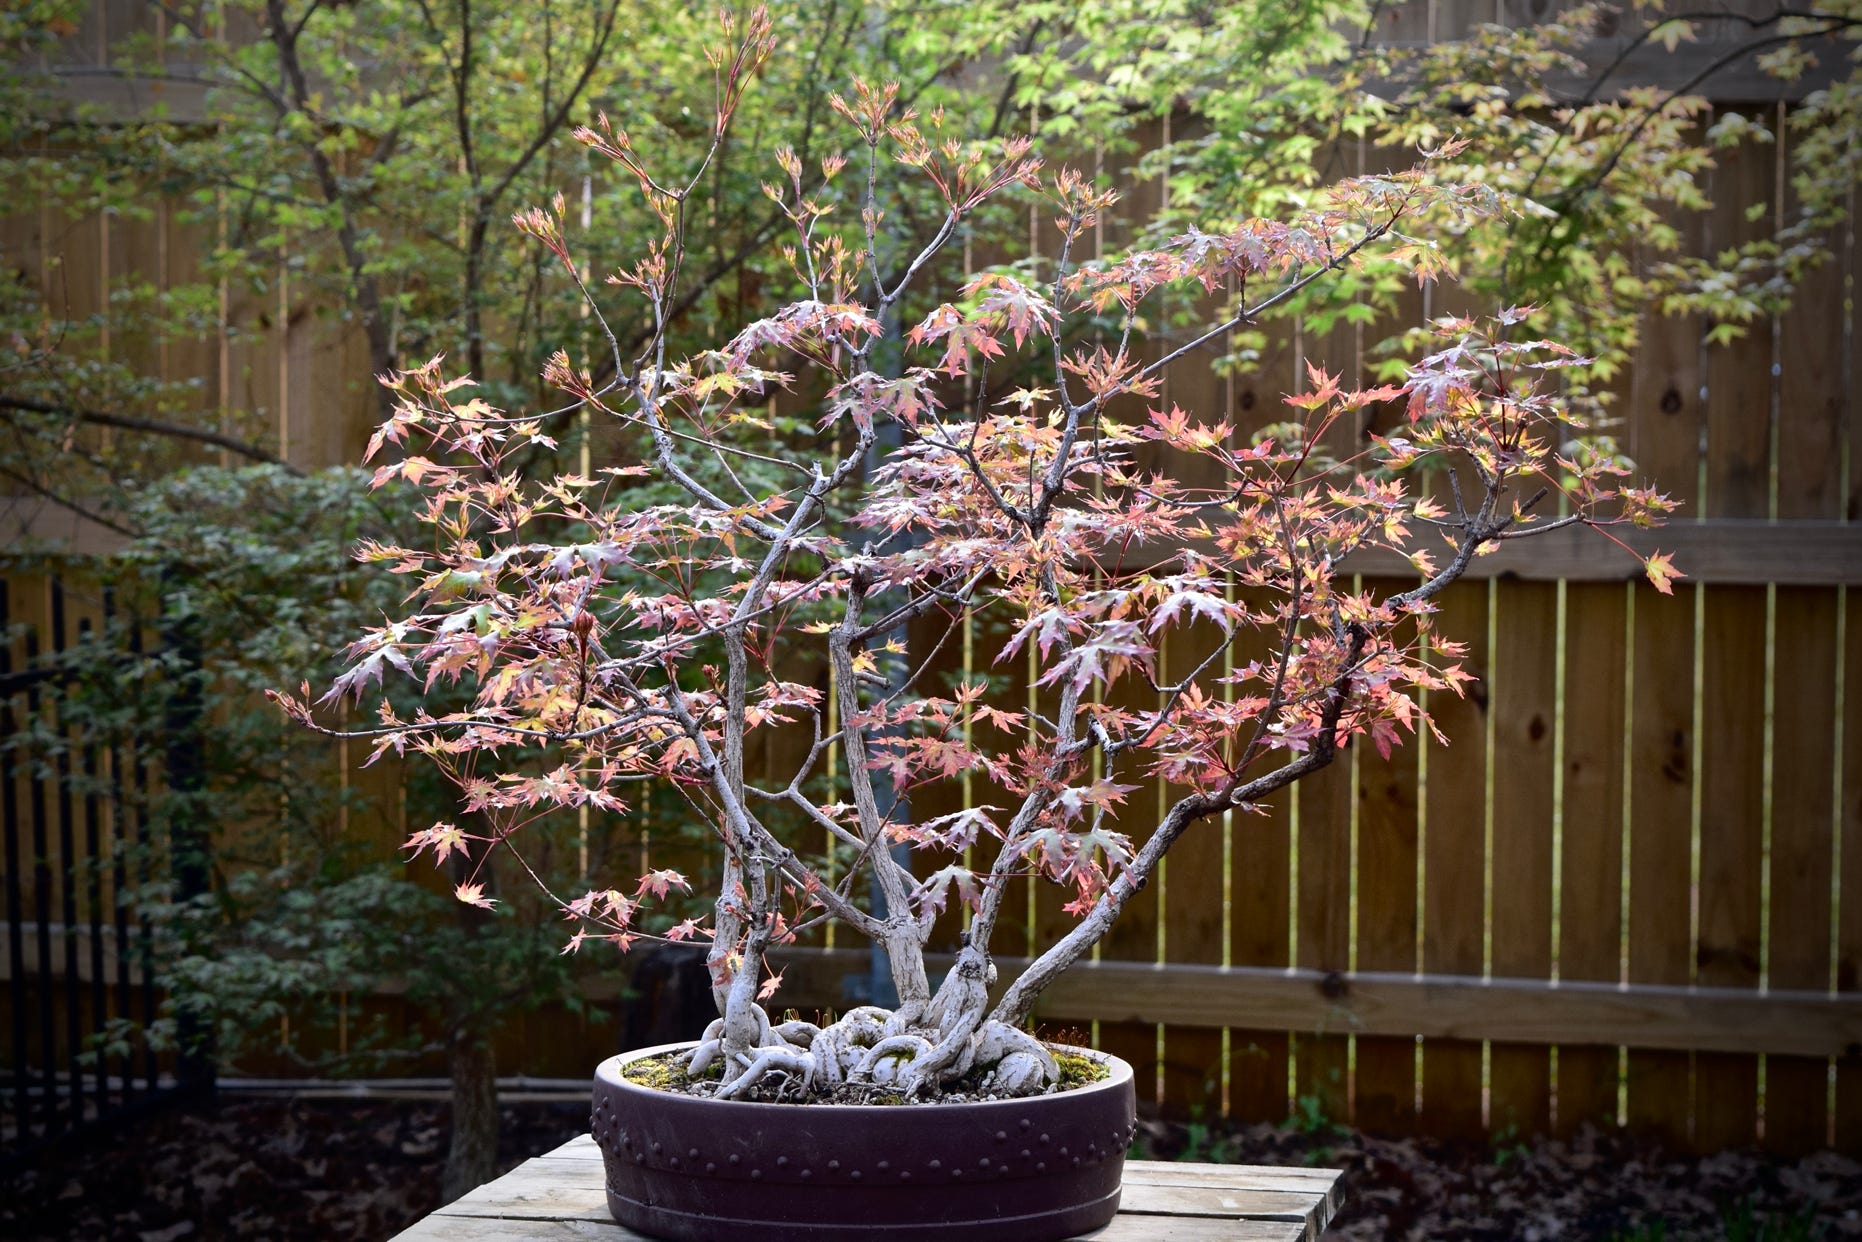 Shantung maple forest planting with exposed roots.  Acer truncatum Shandong maple bonsai maple bonsai